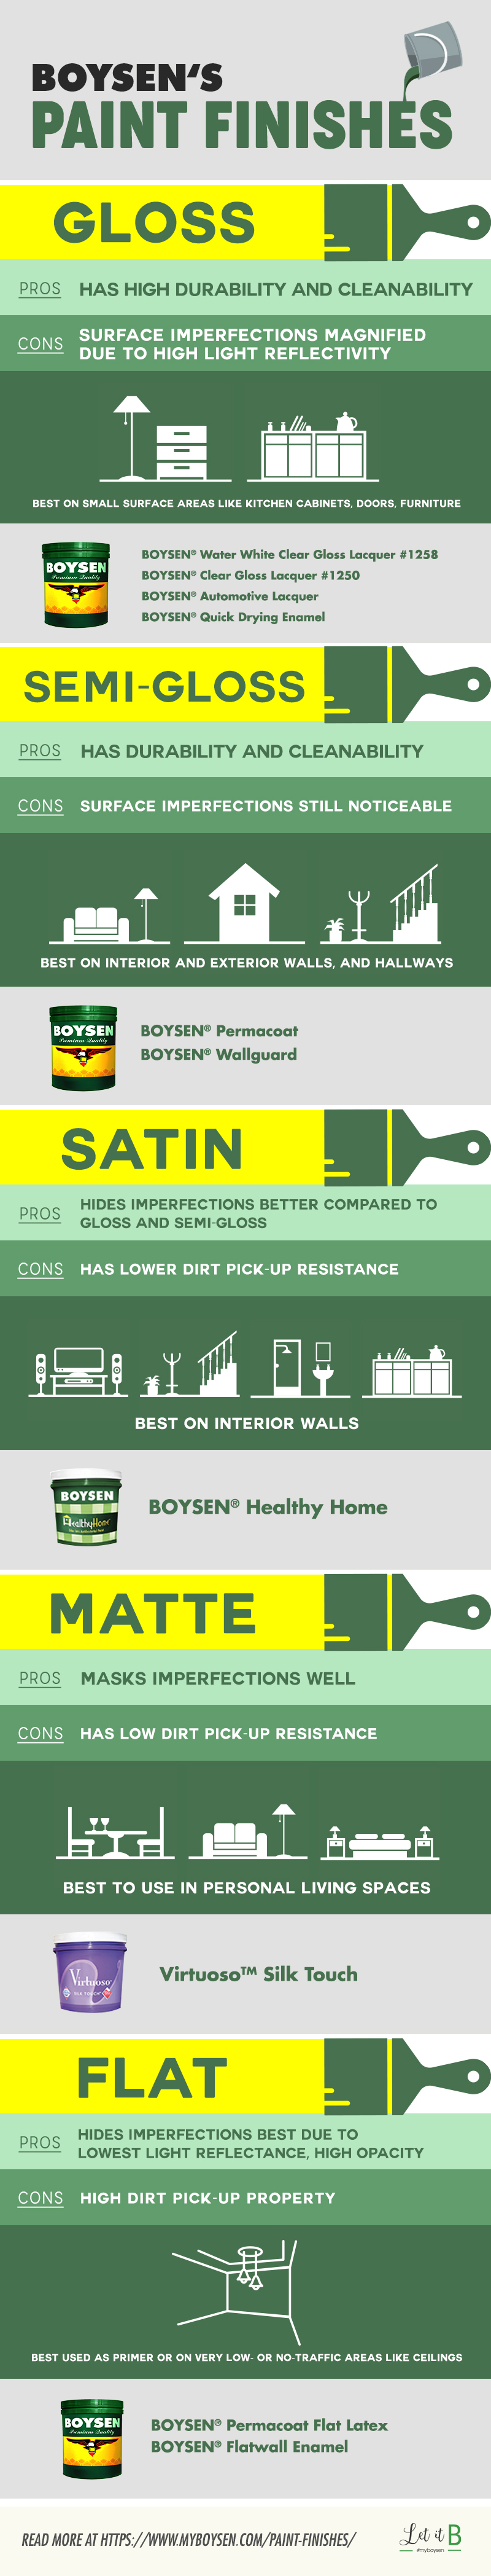 Boysen's Guide to Different Paint Finishes